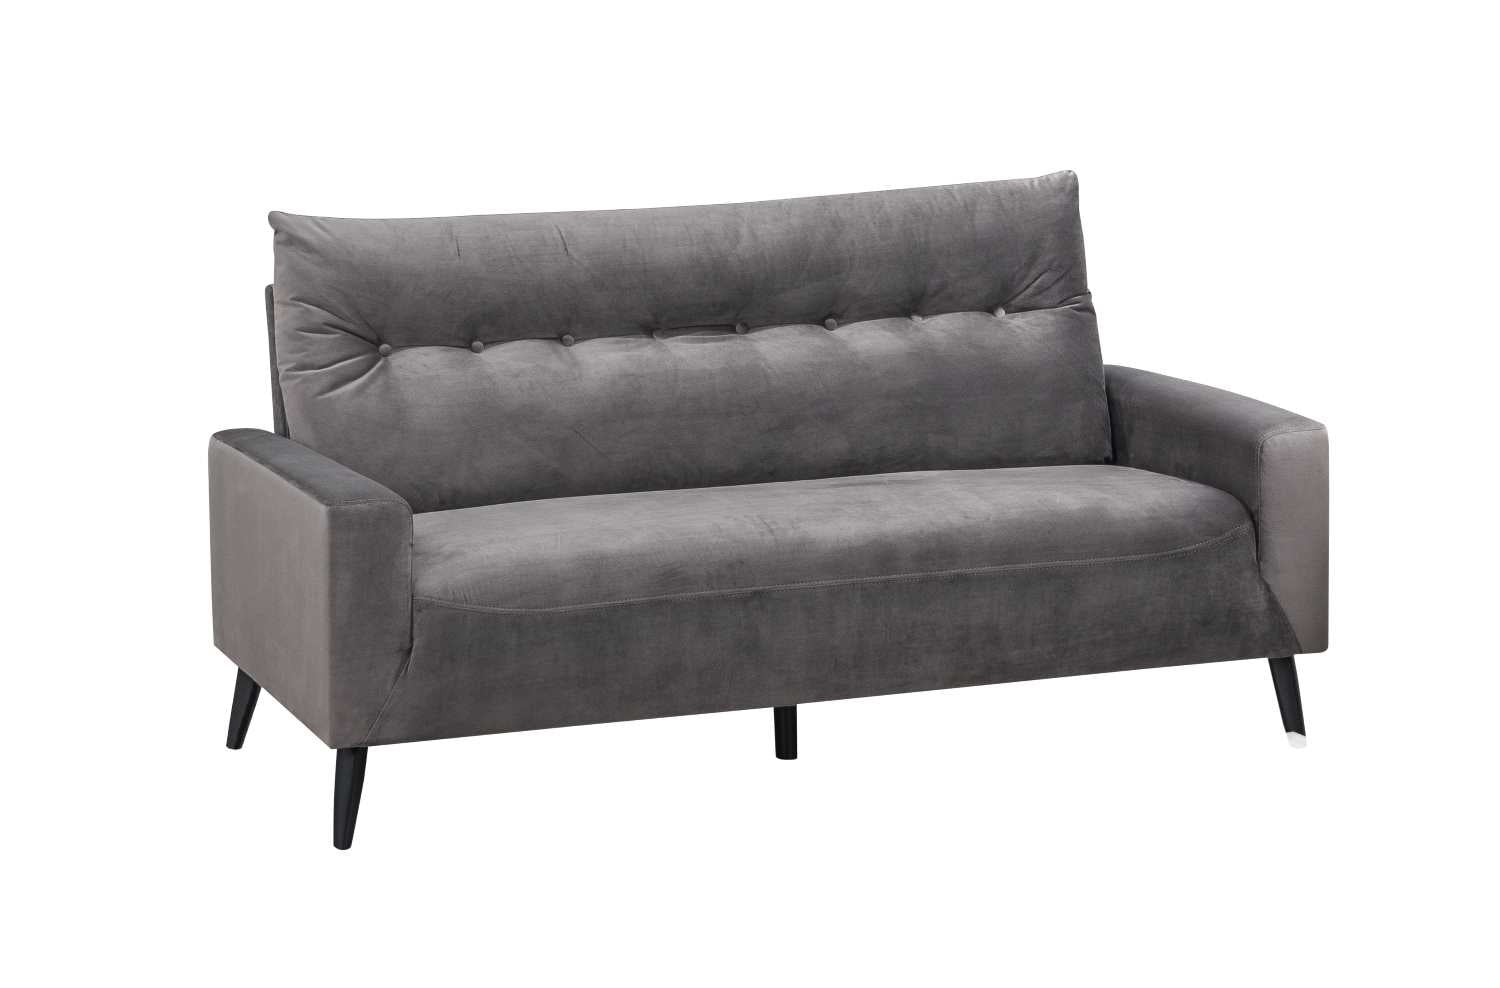 Veronica Charcoal Sofa And Chair 99913 ( OPEN BOX )